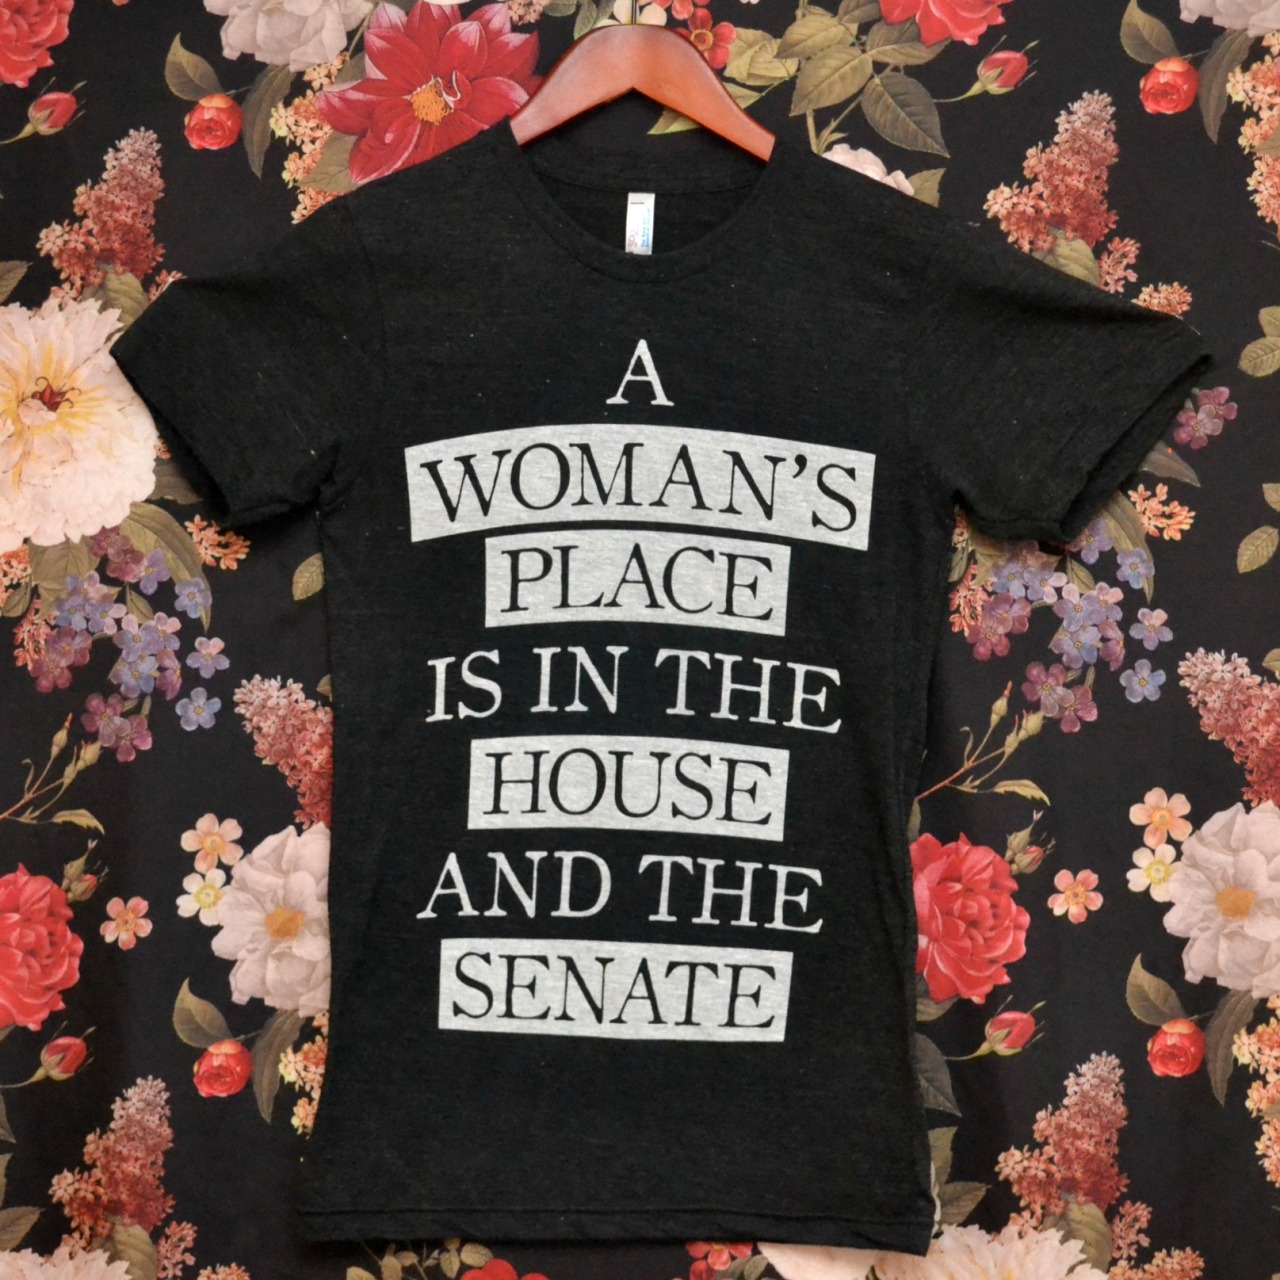 the-absolute-best-gifs:  Wicked Clothes presents: the Tri-Blend ’A Woman’s Place’